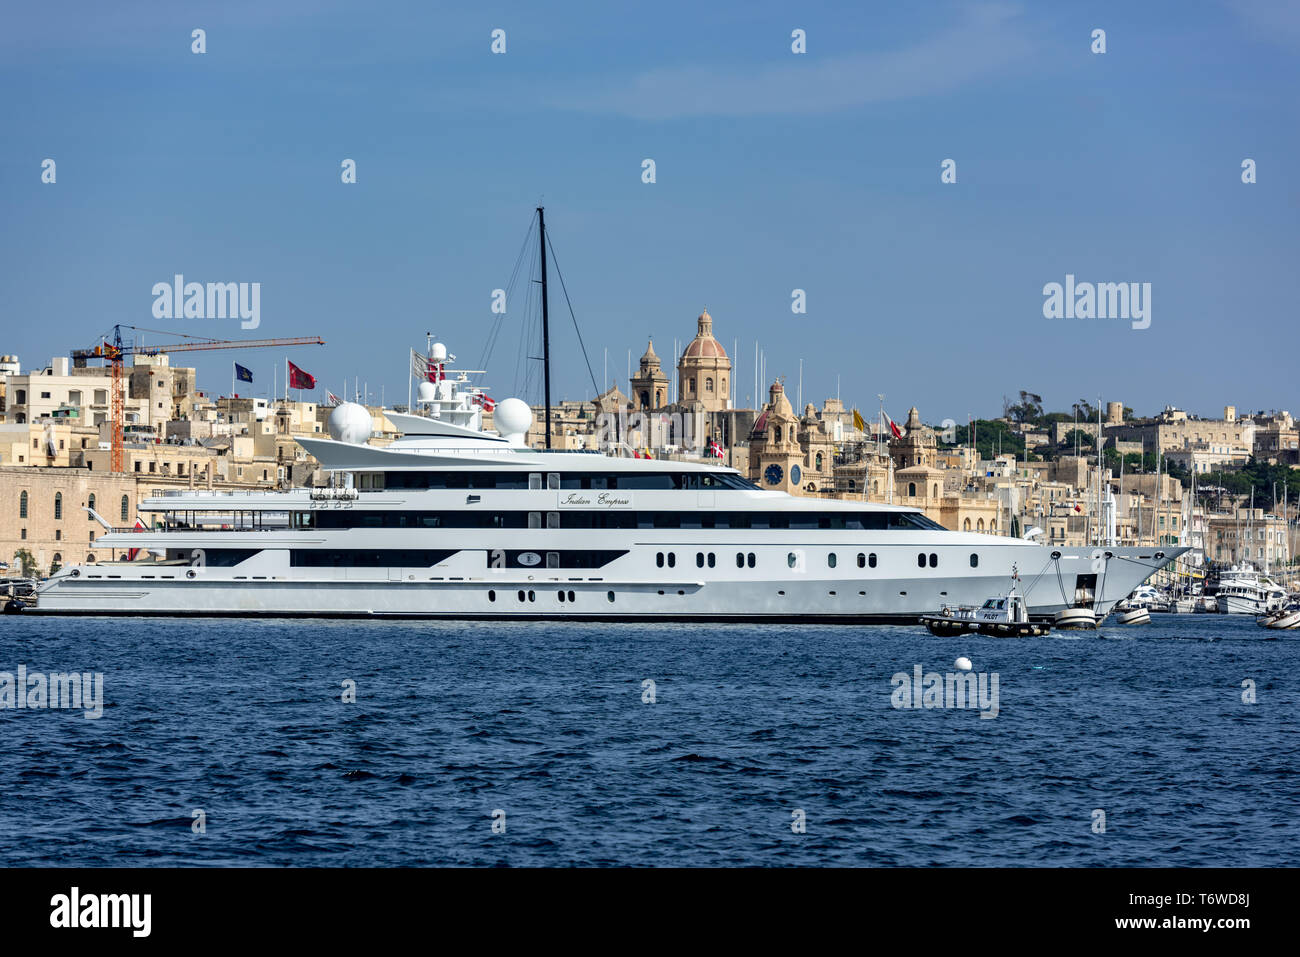 The 95 metre Indian Empress luxury yacht in the Grand Harbour in Birgu, Malta with  the domes of St Anne's and St Philip's churches in the background Stock Photo